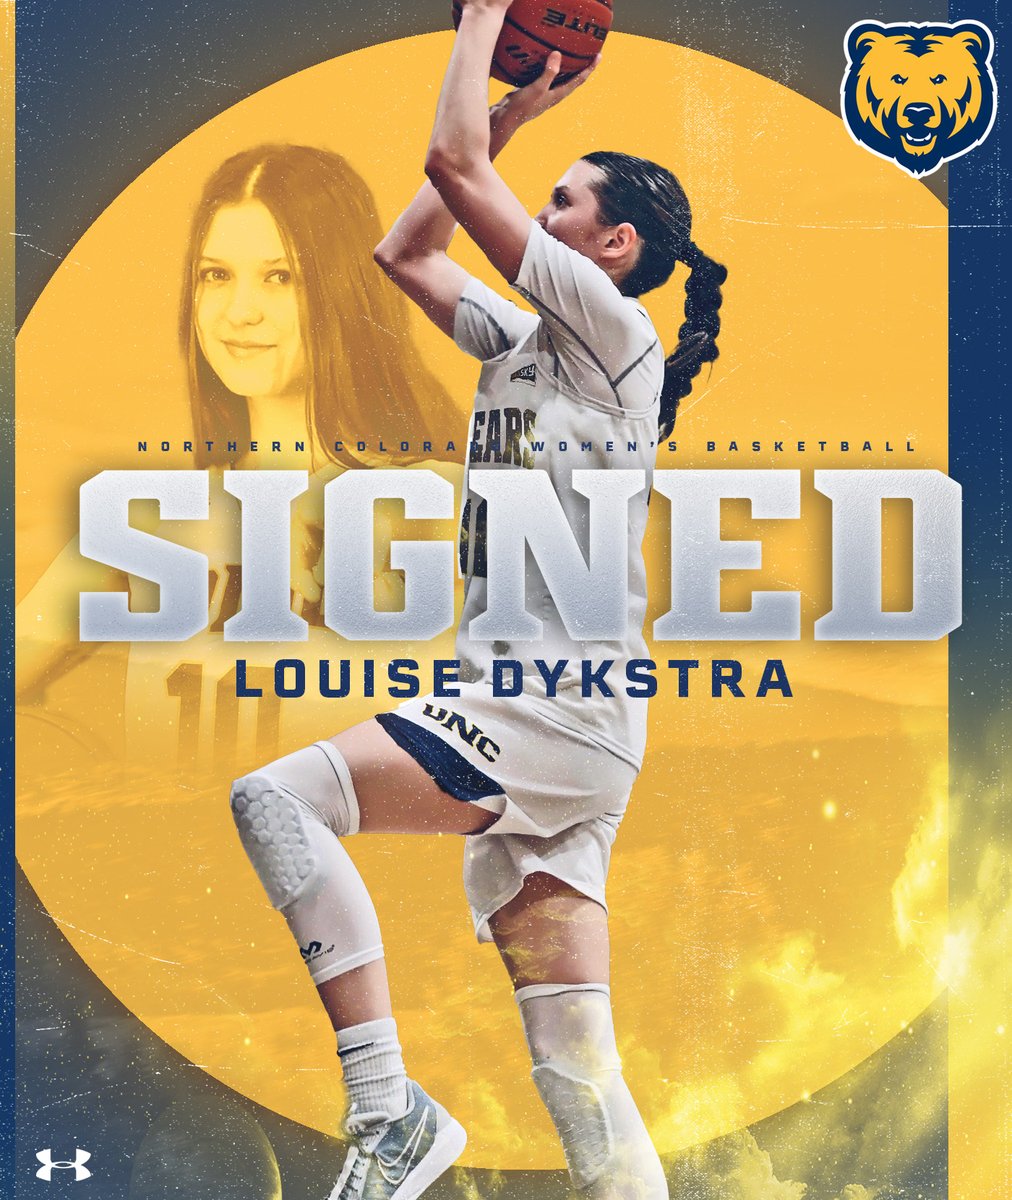 We are excited to announce we have signed Claire Fraser and Louise Dykstra 🖊️ Claire Fraser 📍 Brisbane, Australia 📏 6'0'' 🏀 Guard 🖊️ Louise Dykstra 📍 Vancouver, British Columbia, Canada 📏 6'2'' 🏀 Forward Read More ⤵️ loom.ly/JCVuY8w #GetUpGreeley